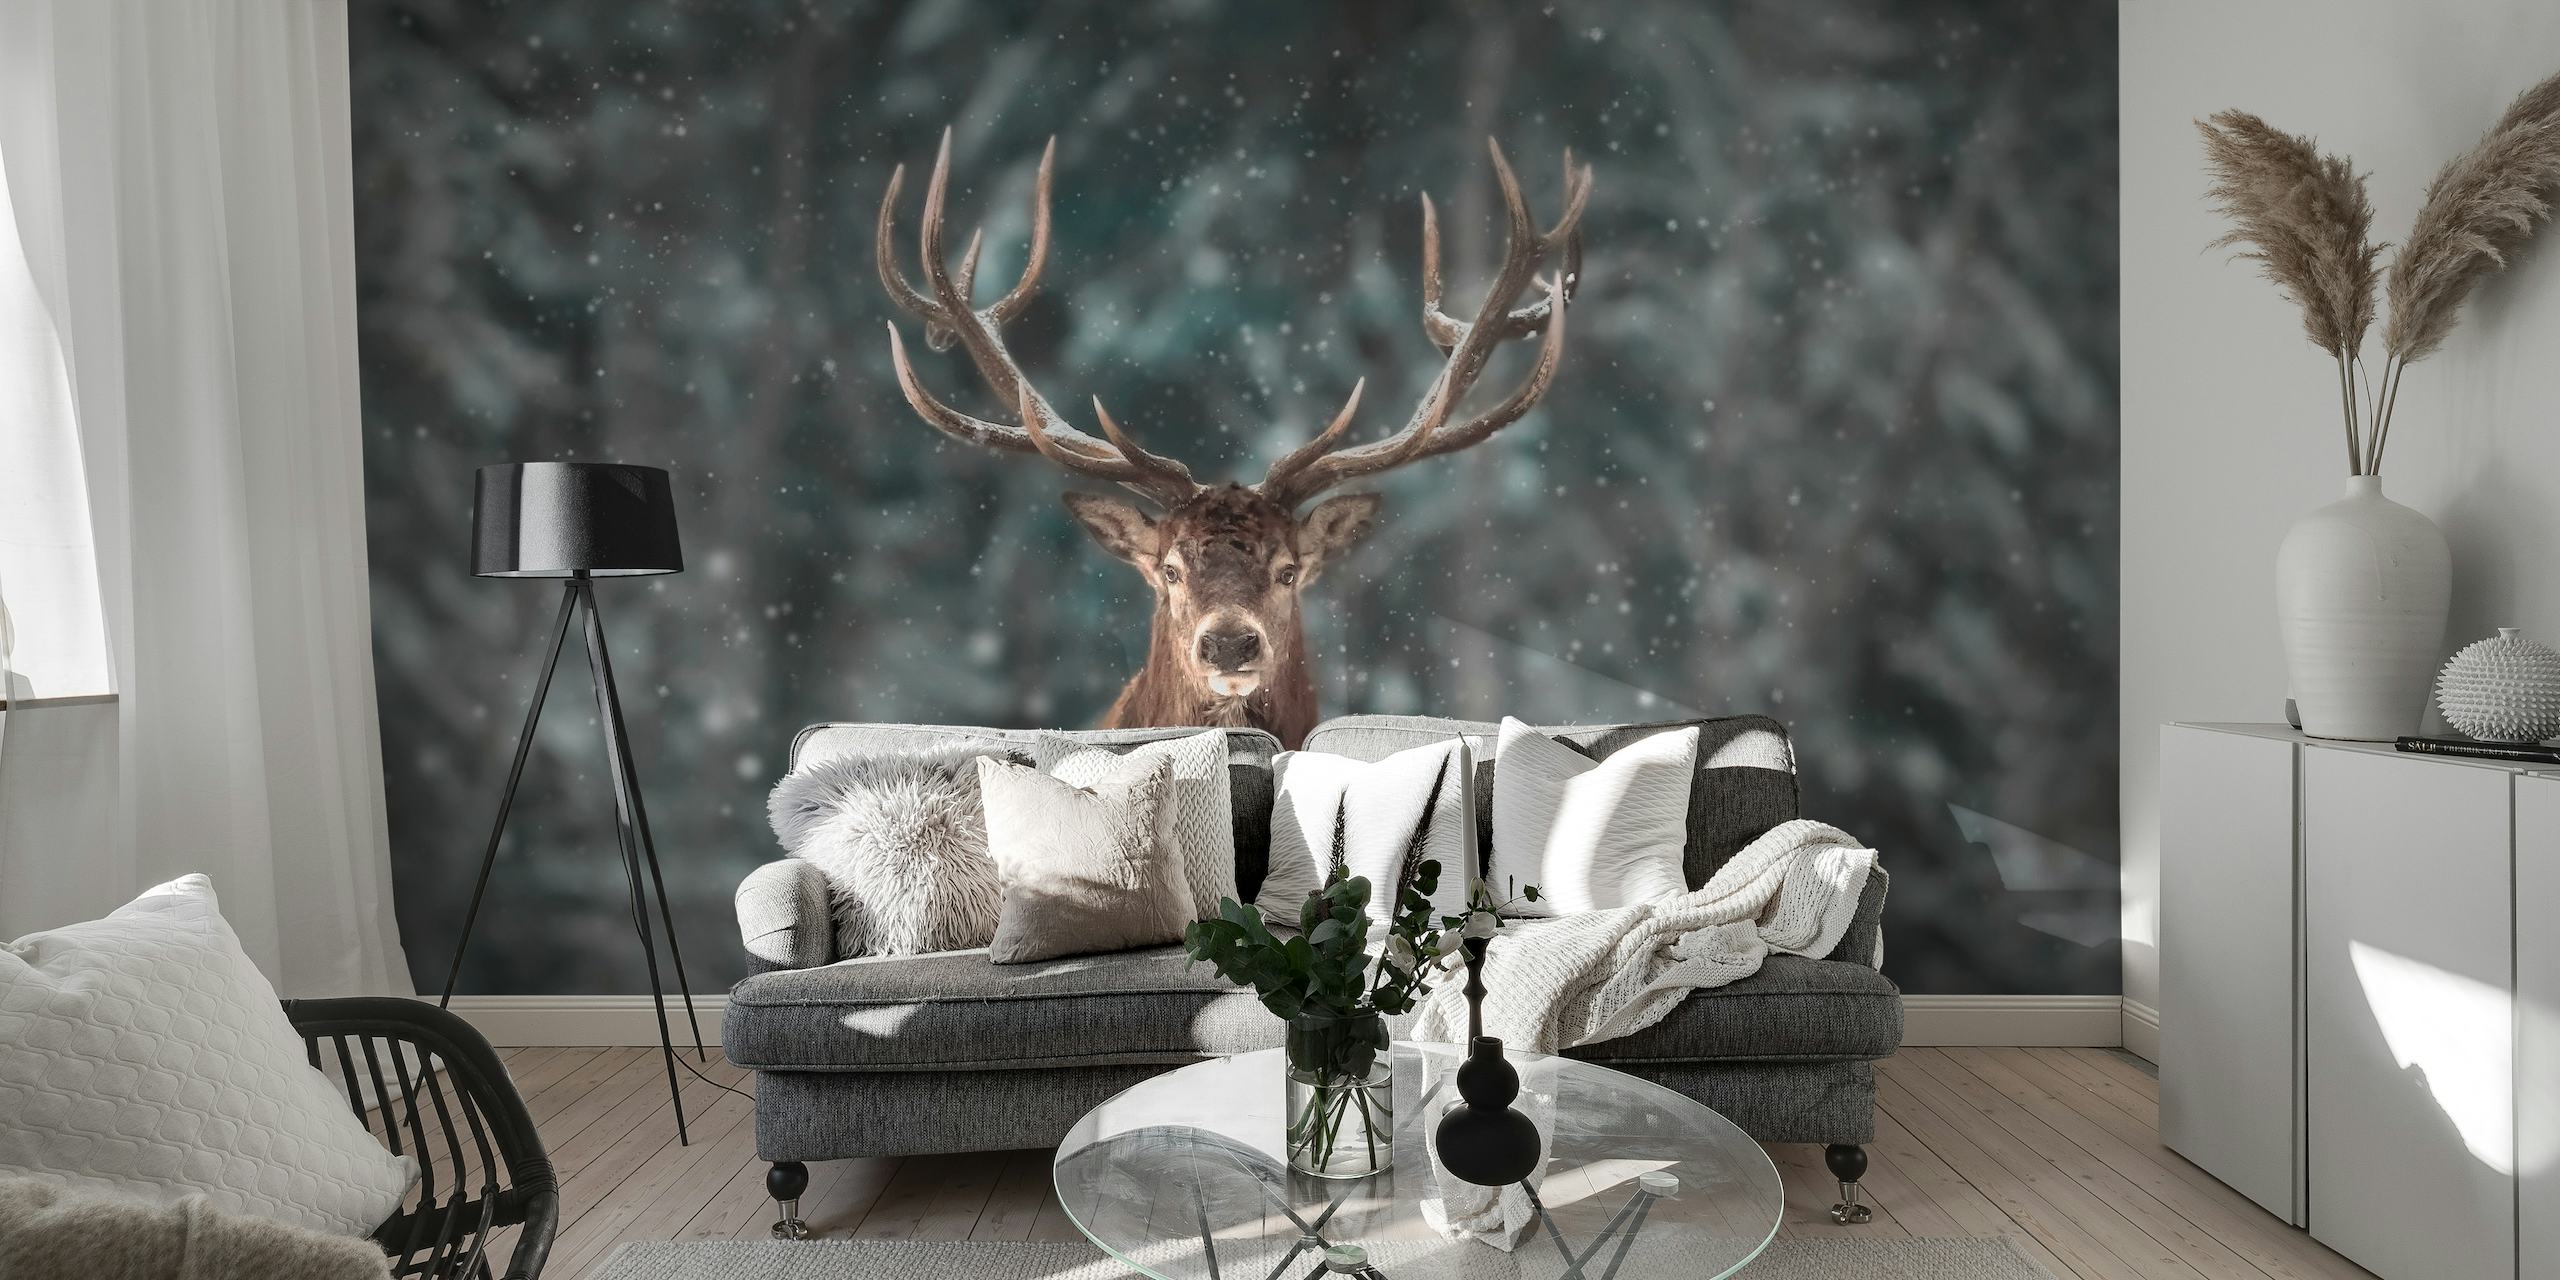 Majestic deer with grand antlers wall mural in a misty forest setting